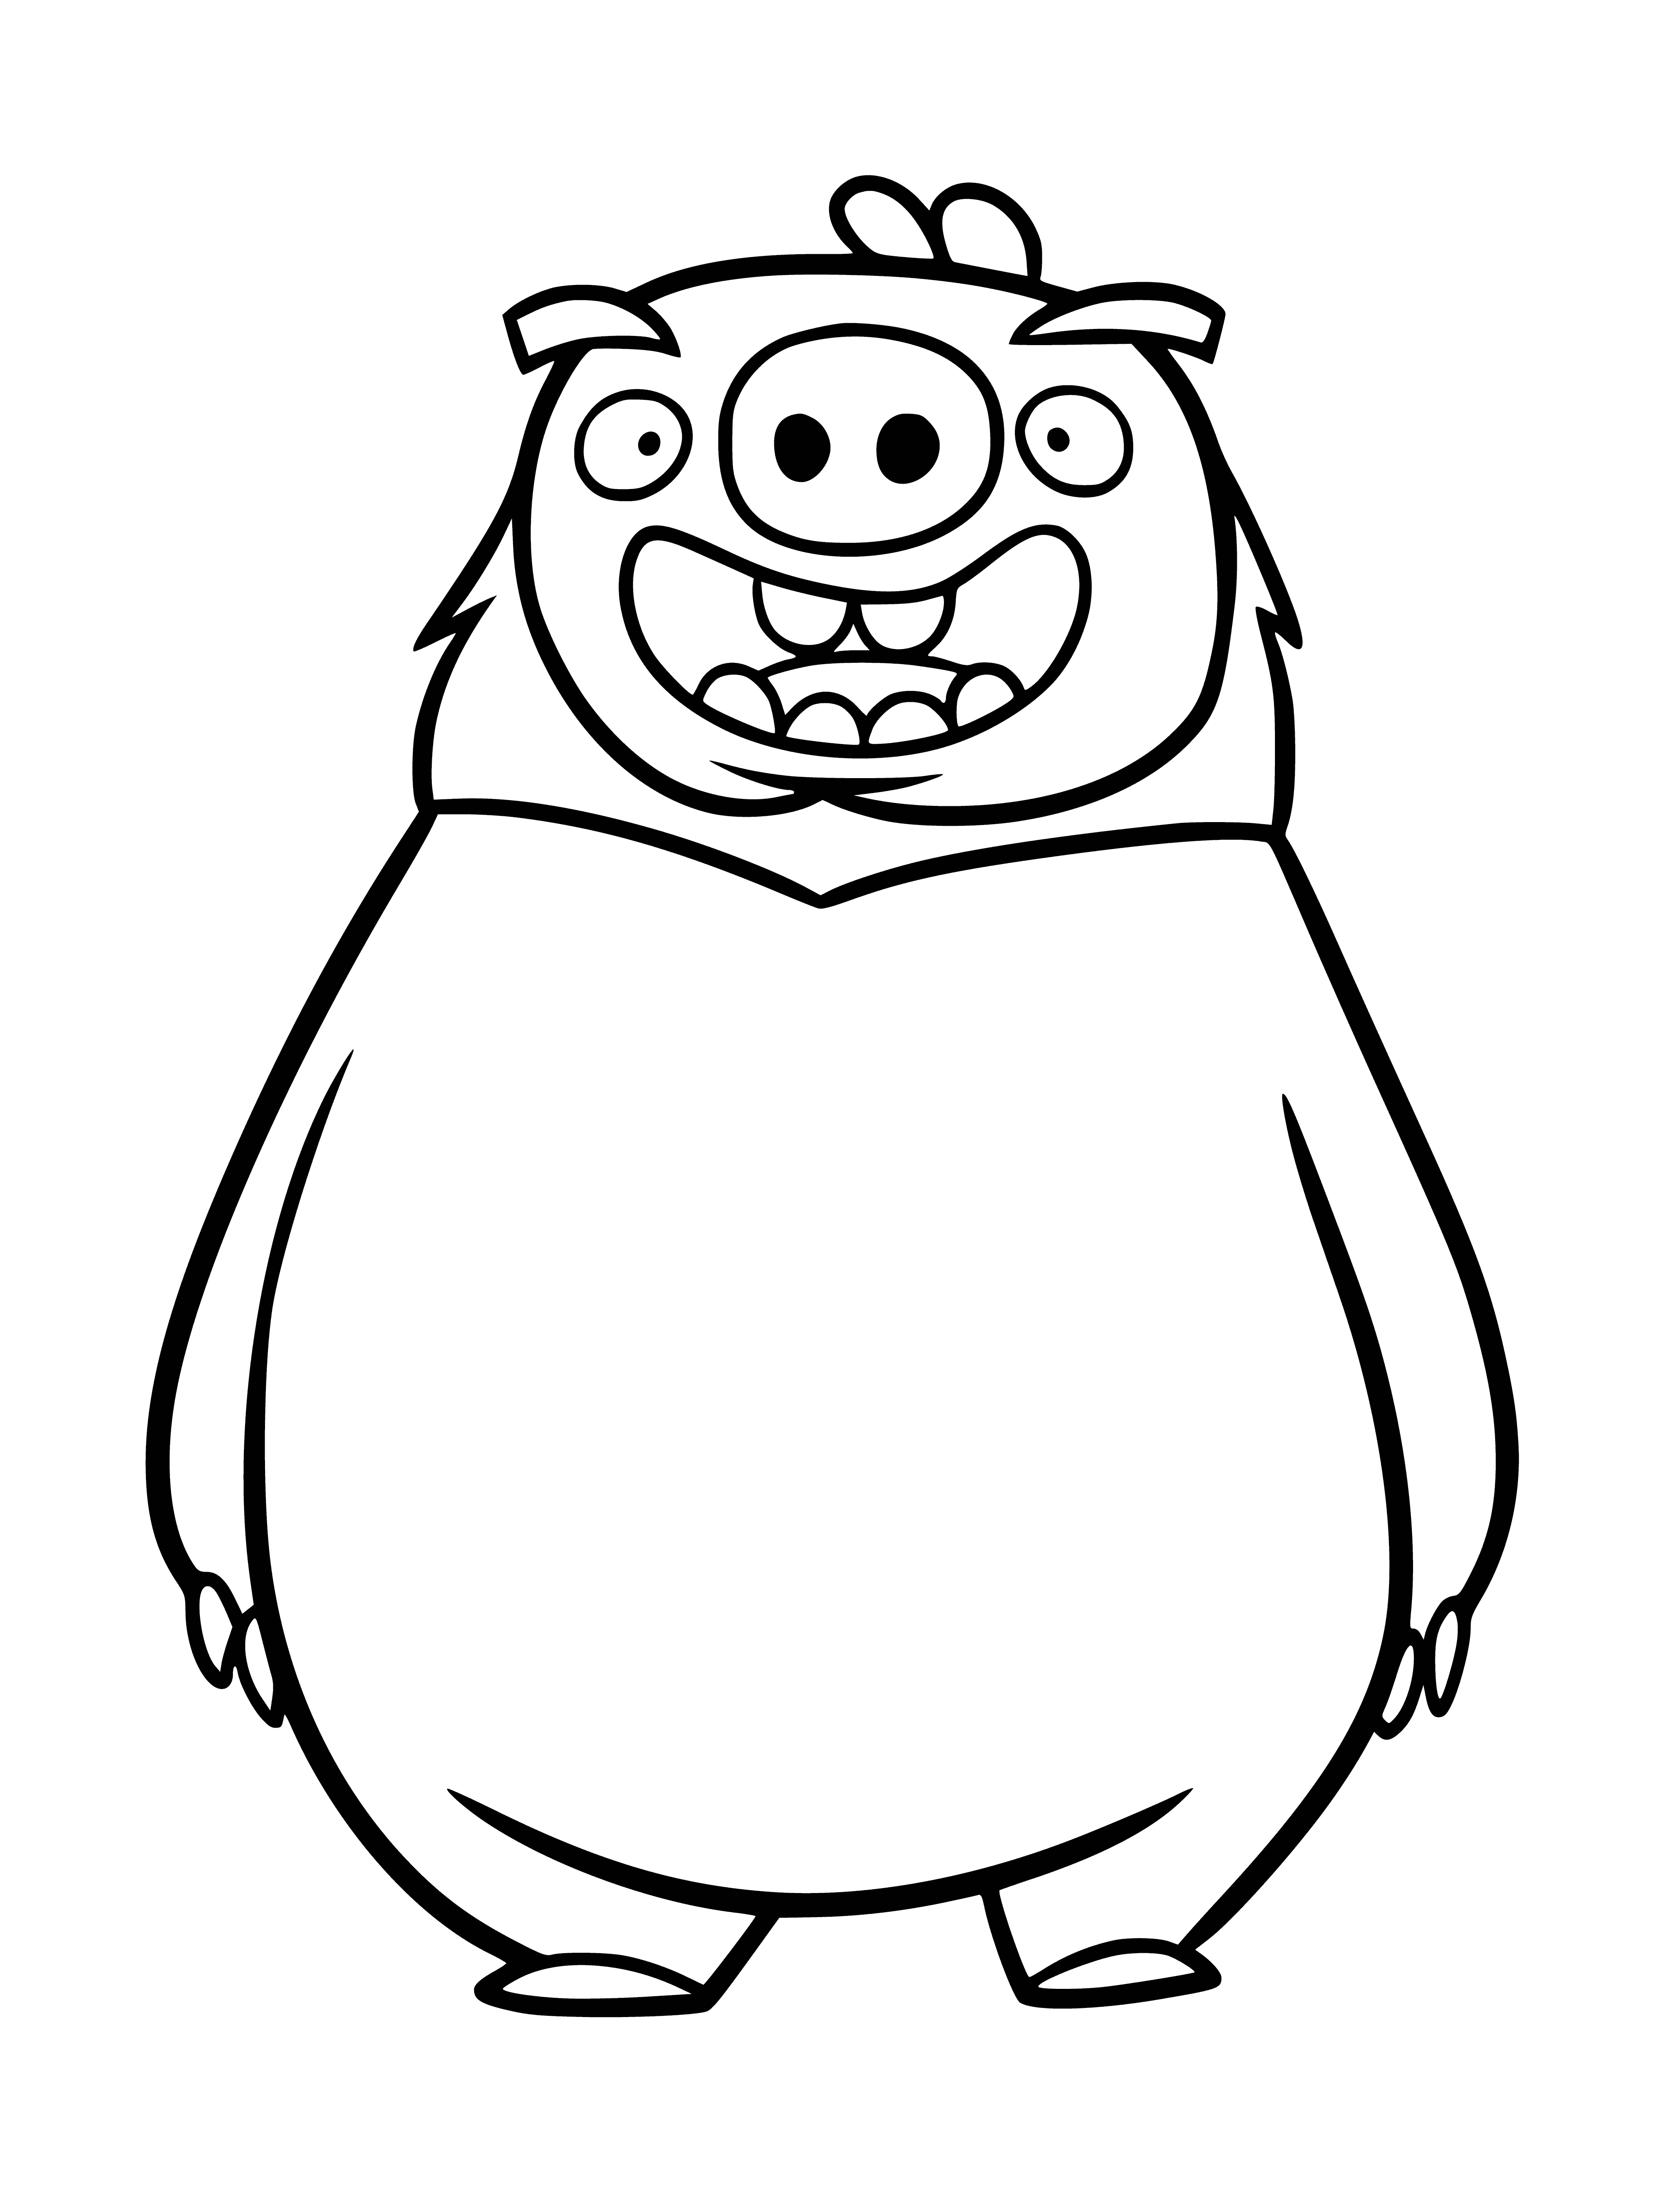 King Leonard the Bearded coloring page